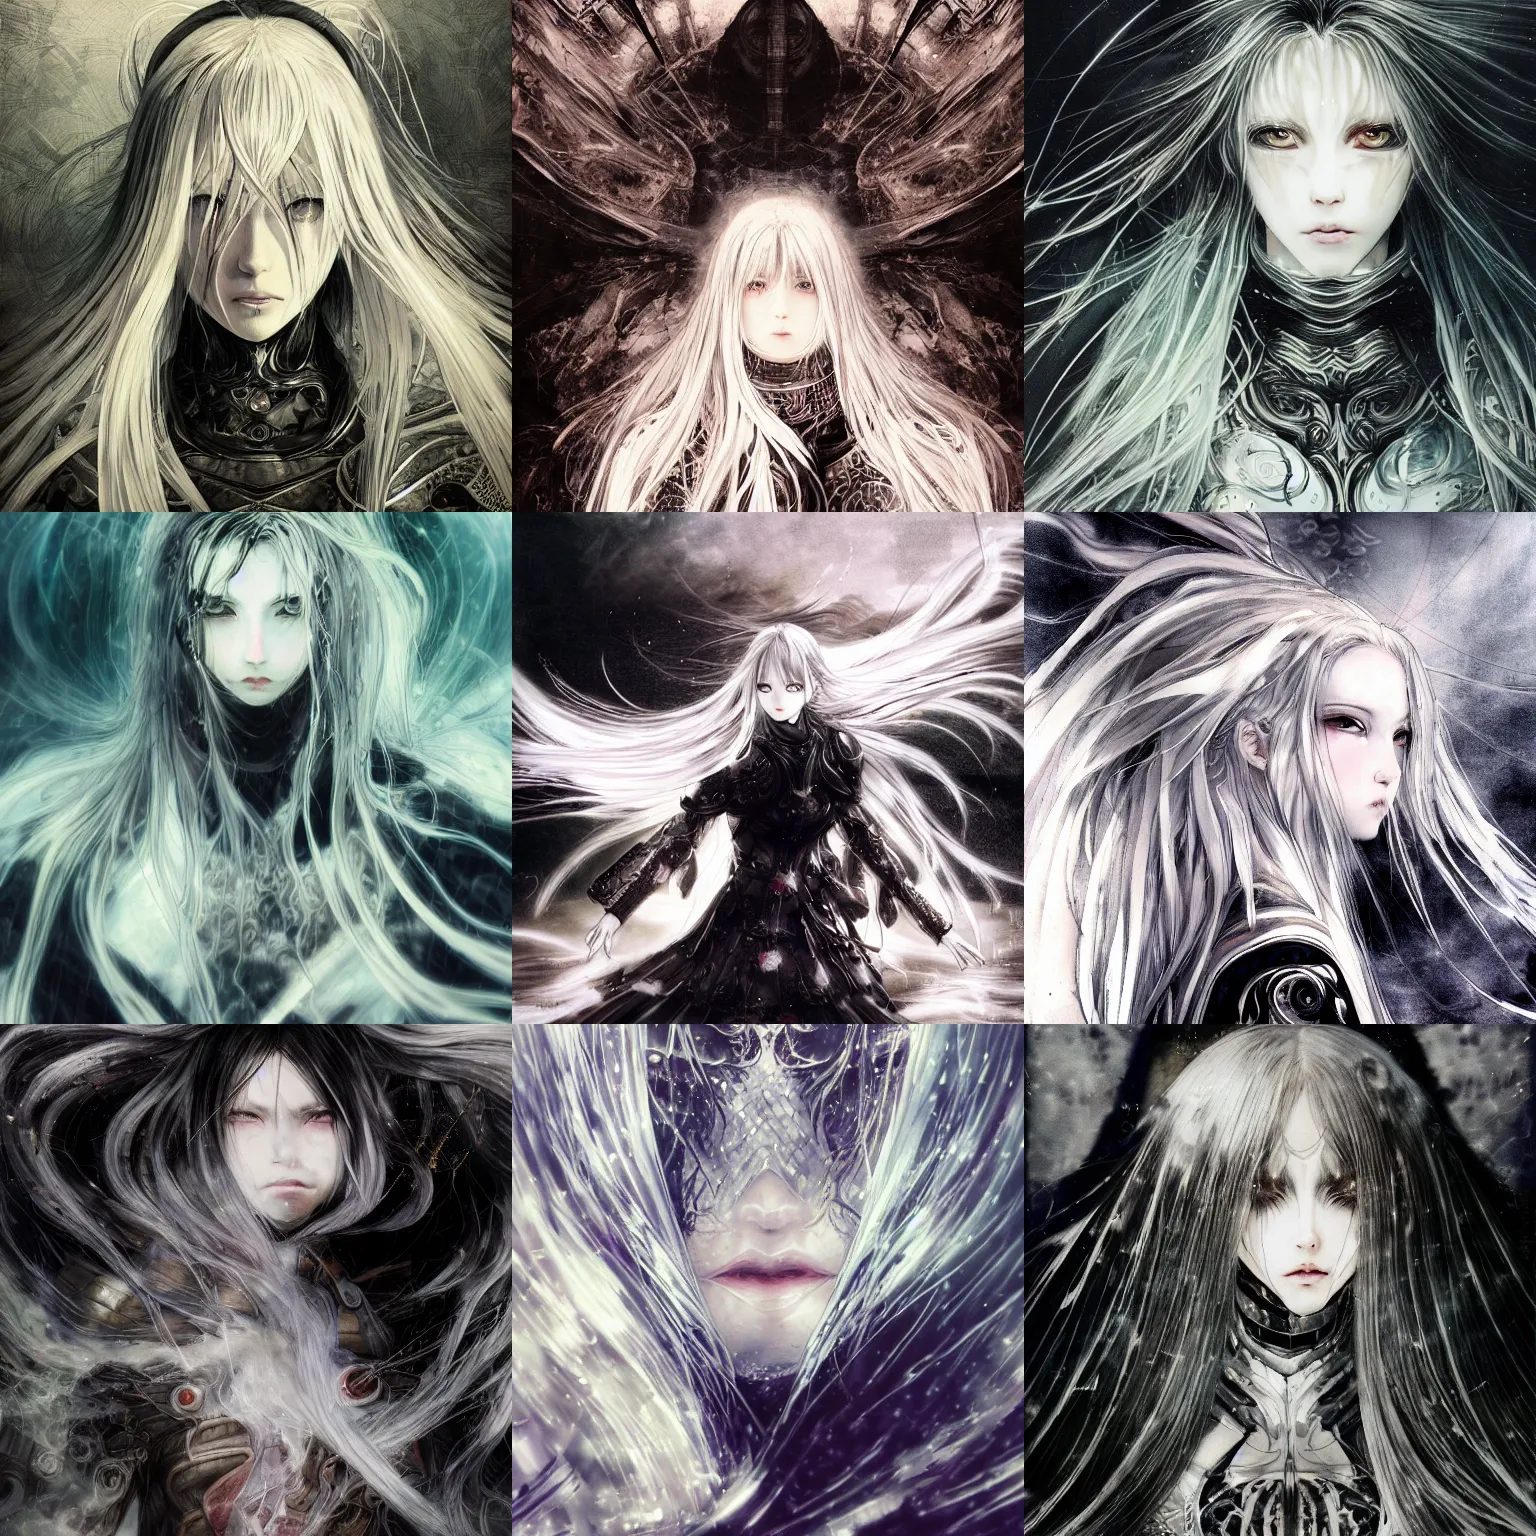 Prompt: yoshitaka amano style illustration, blurred and dreamy photo, anime girl with wavy white hair merging with the background and cracks on her face, elden ring armour with cloak, abstract black and white patterns on the background, noisy film grain effect, highly detailed, renaissance oil painting, weird portrait angle